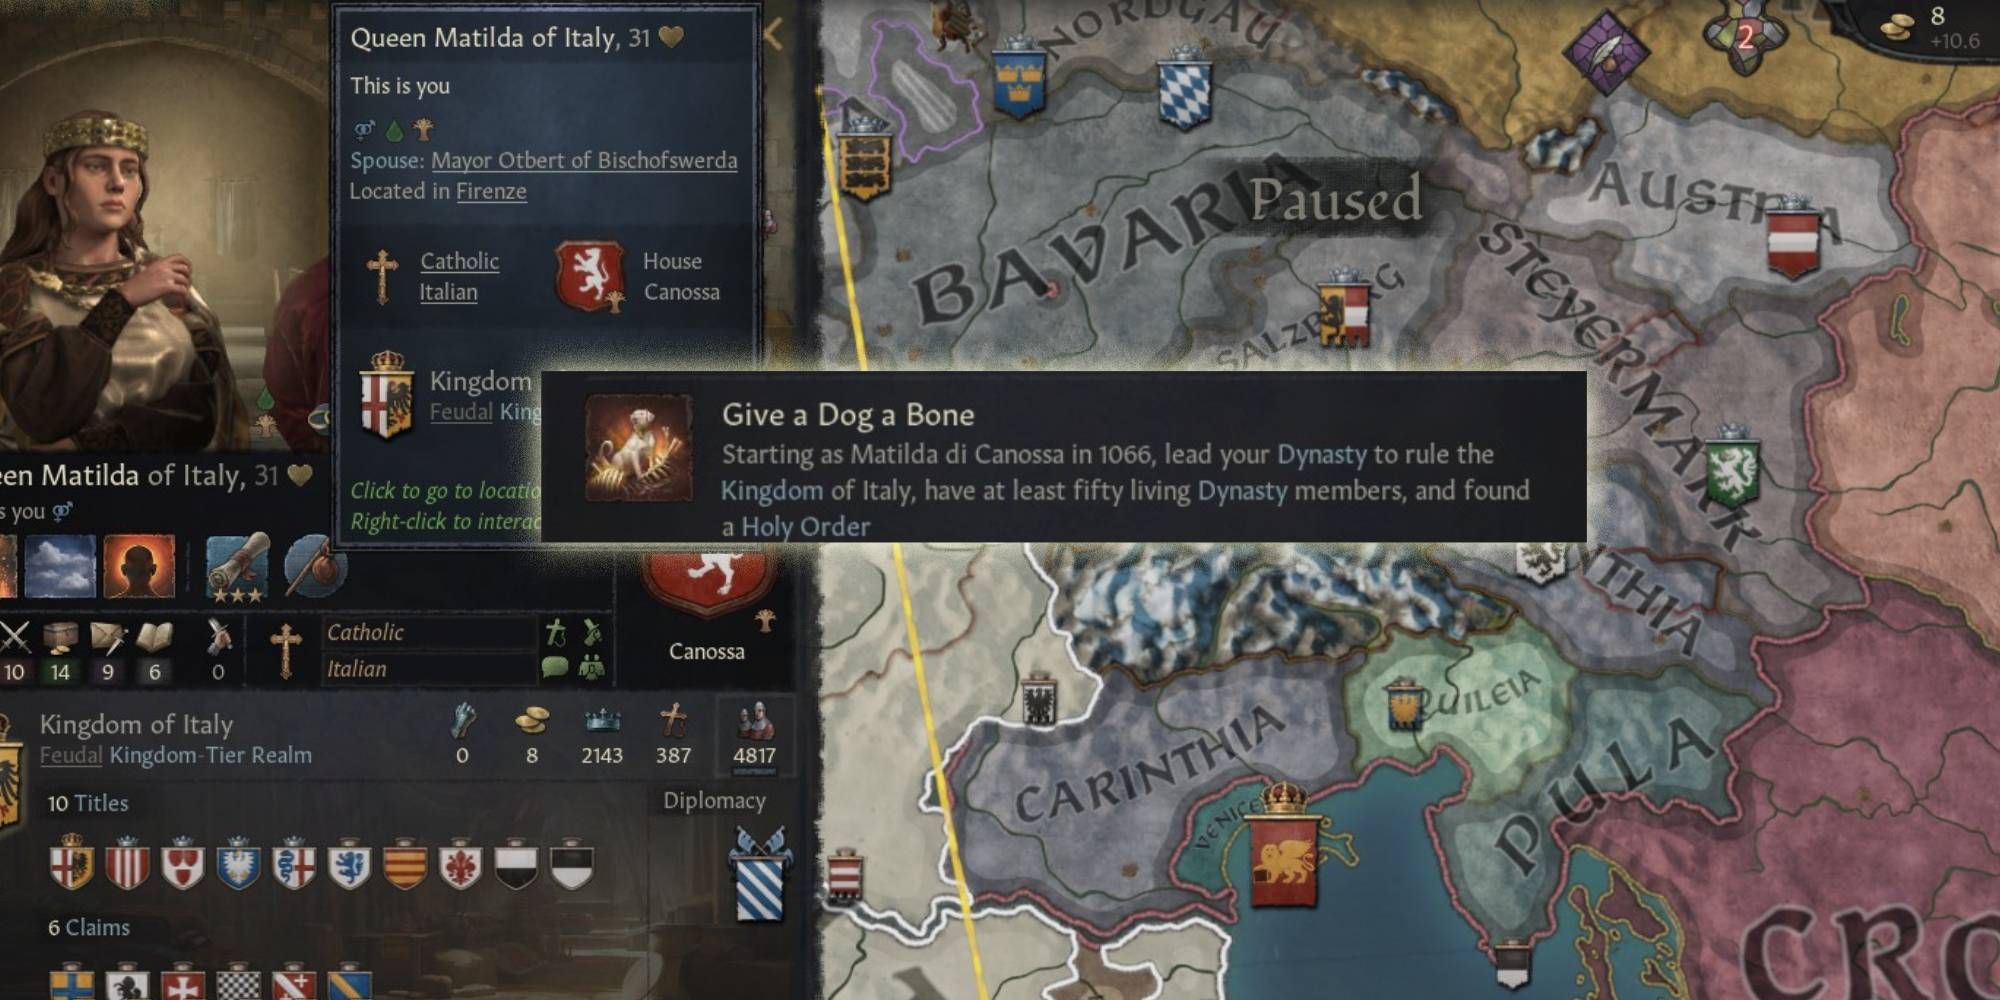 Queen Matilda of Italy behind the Crusader Kings 3 achievement: Give a Dog a Bone